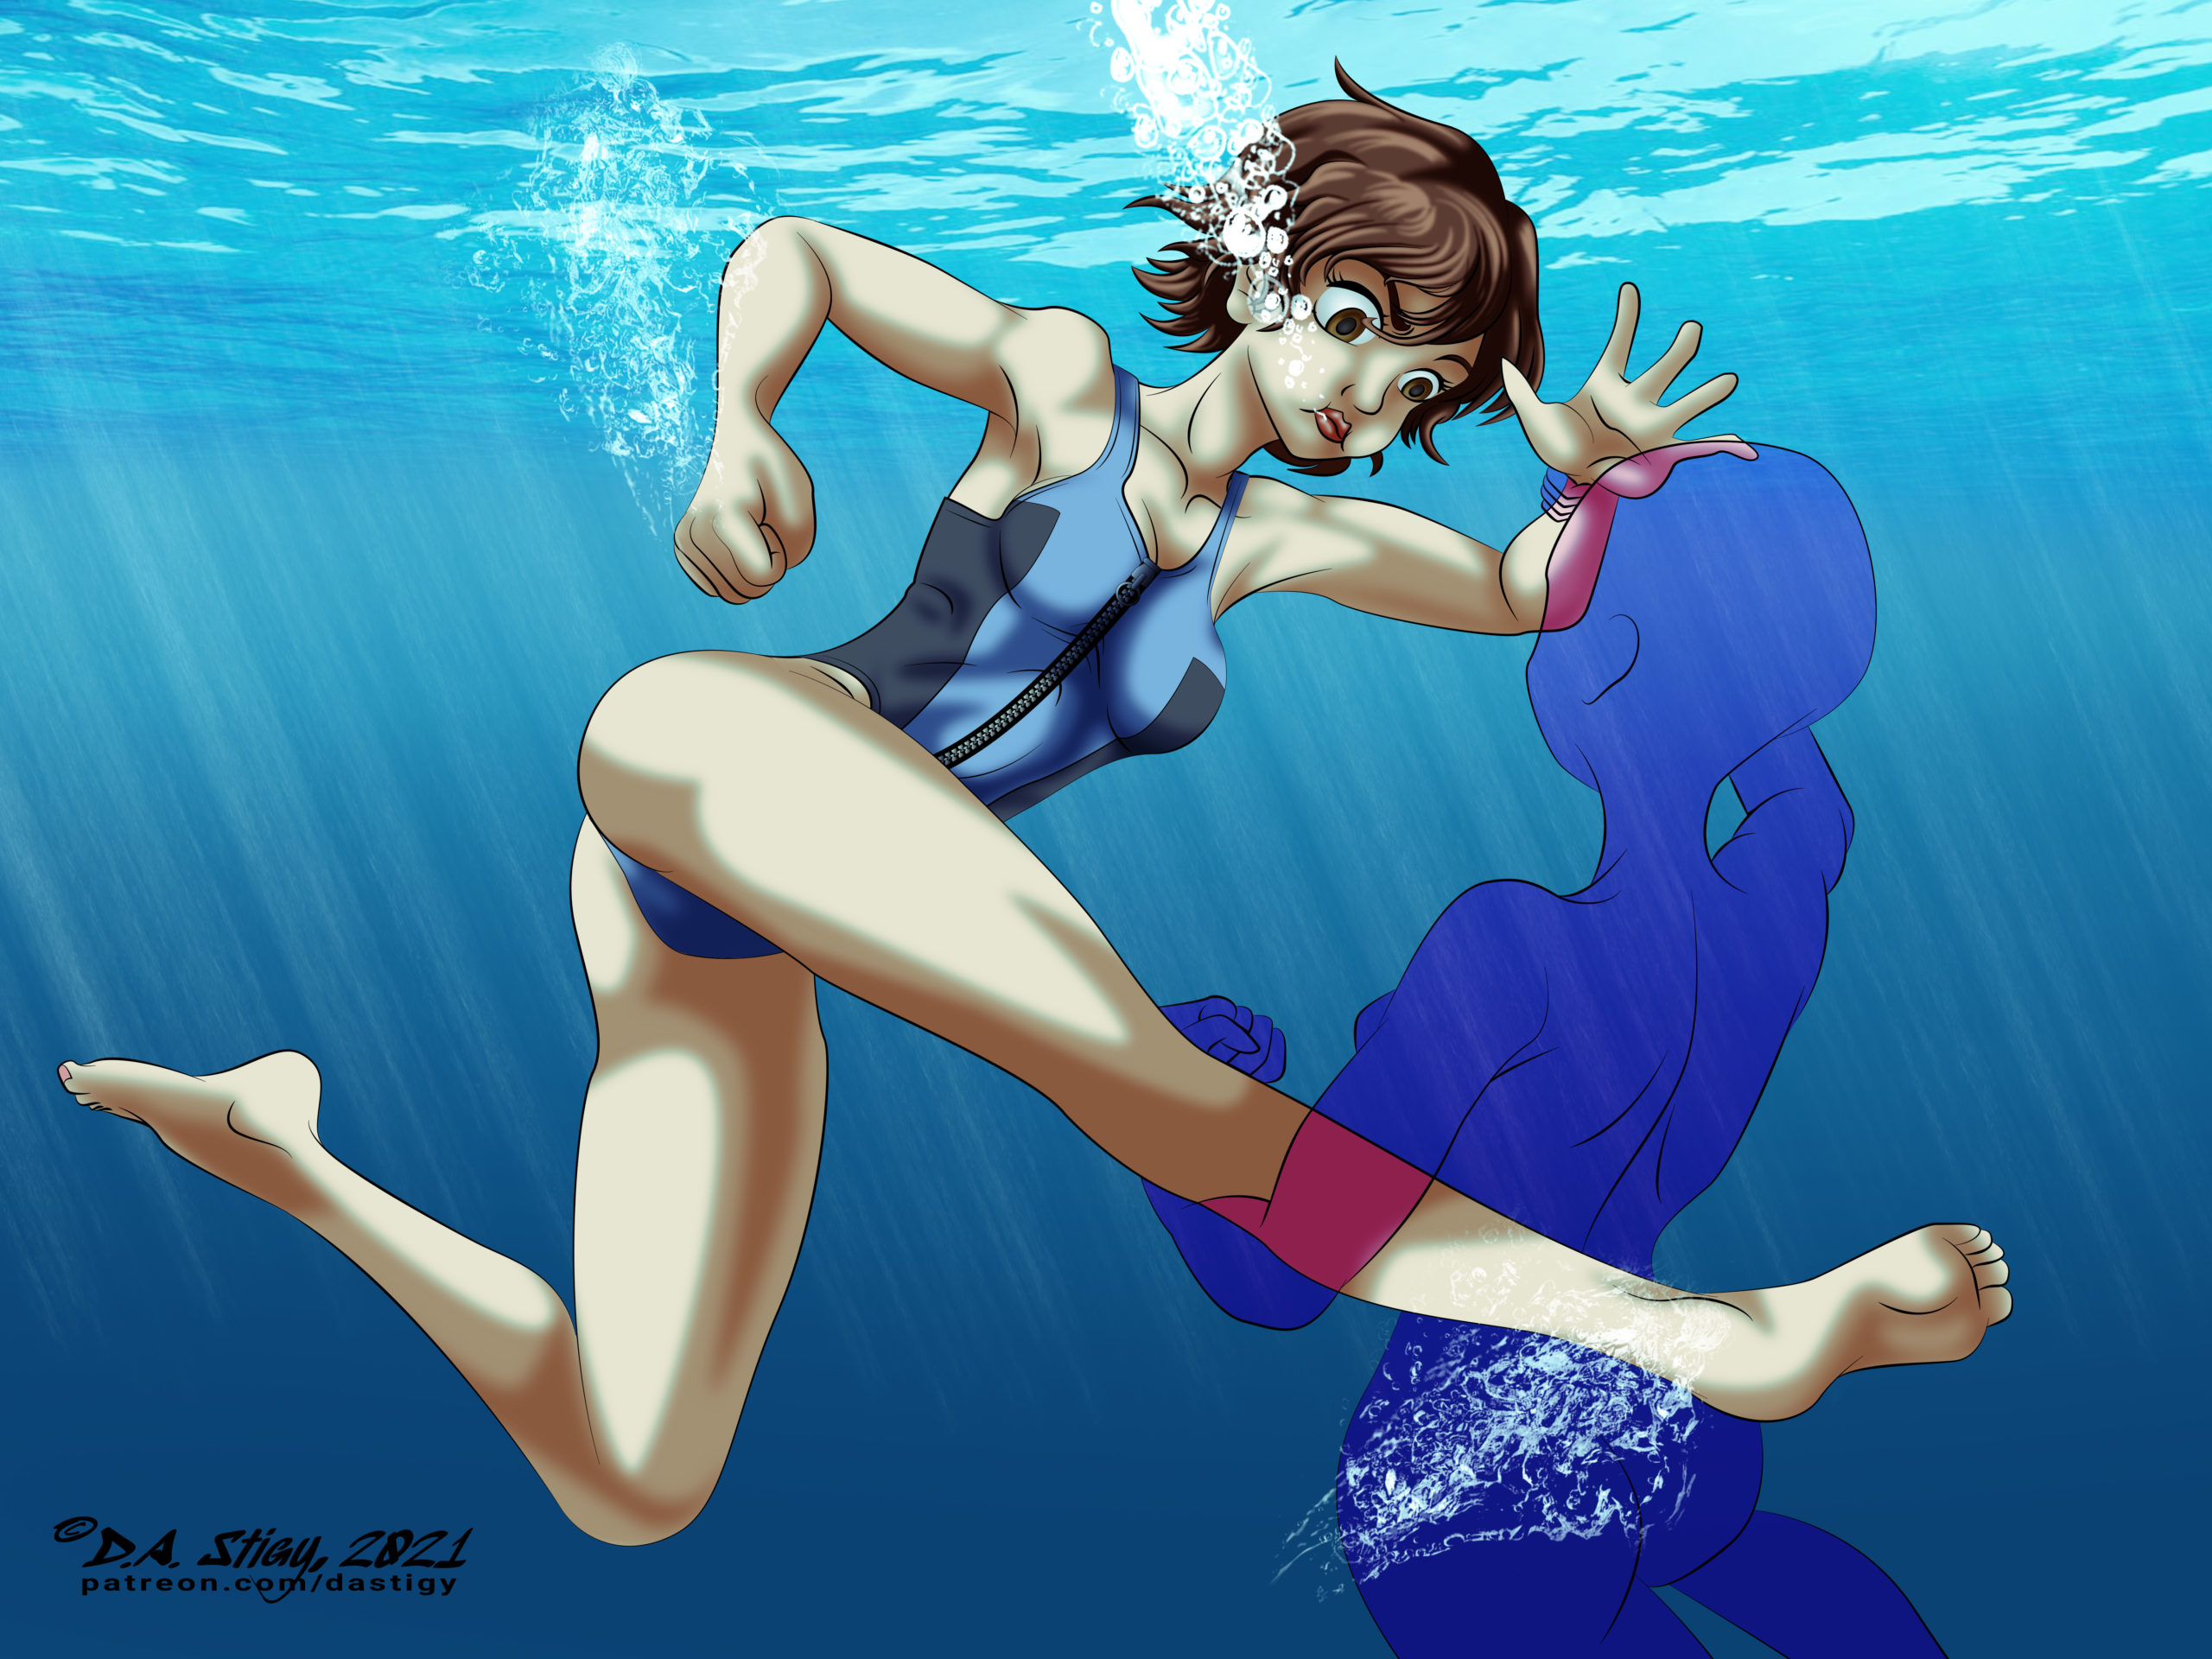 Asuka grappling with a foe underwater